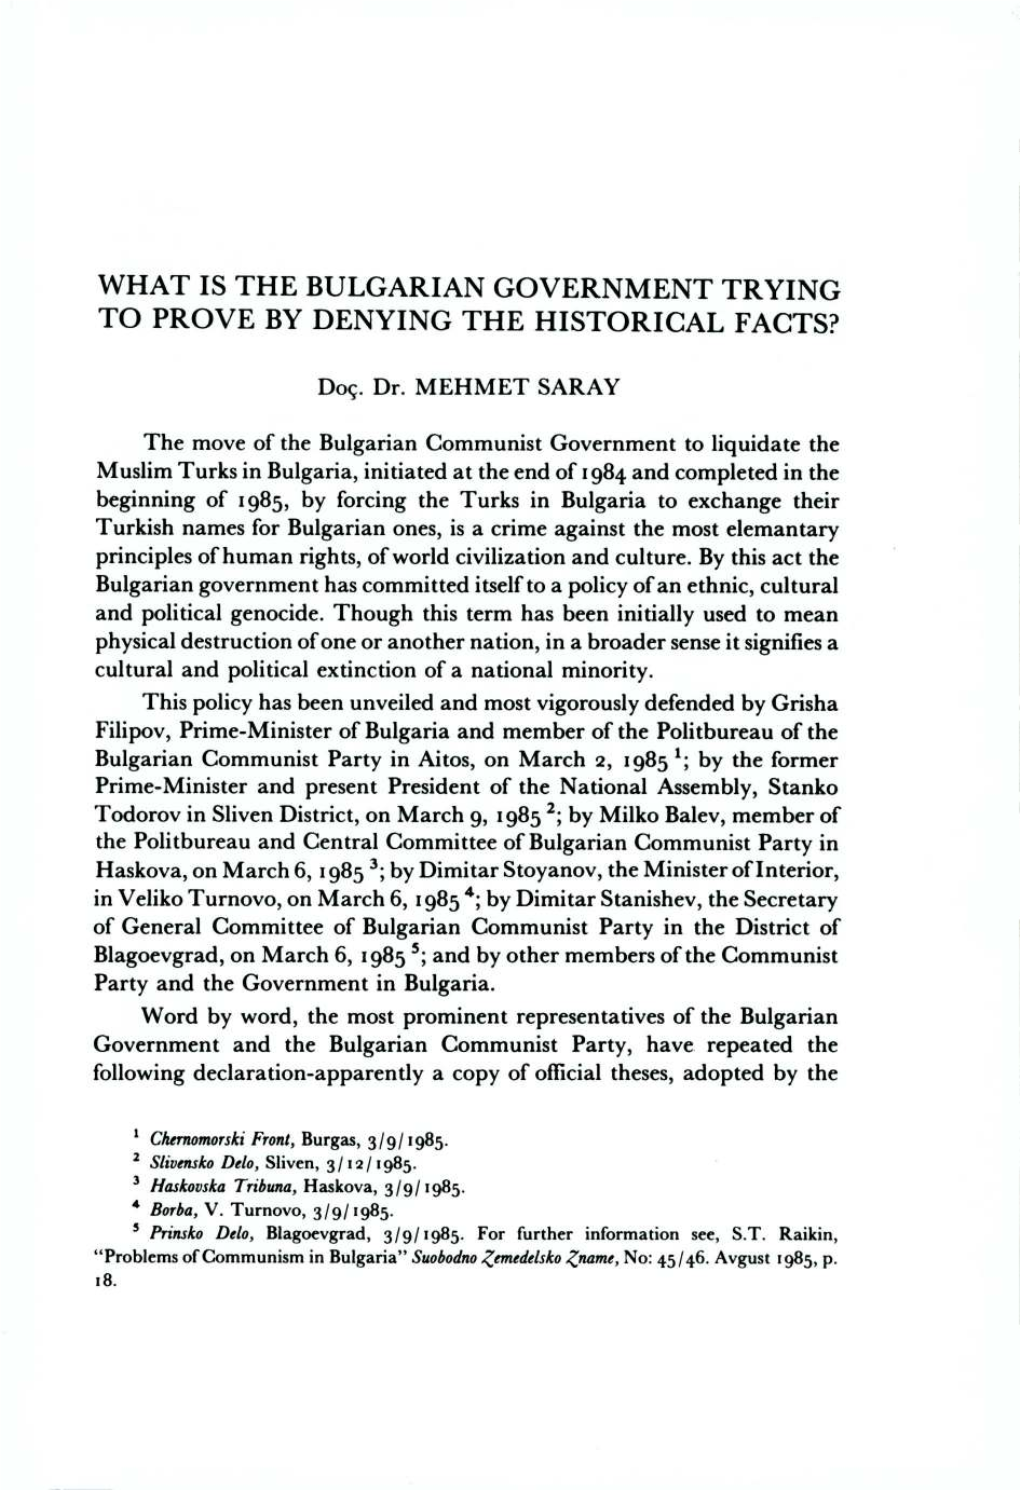 What Is the Bulgarian Government Trying to Prove by Denying the Historical Facts?